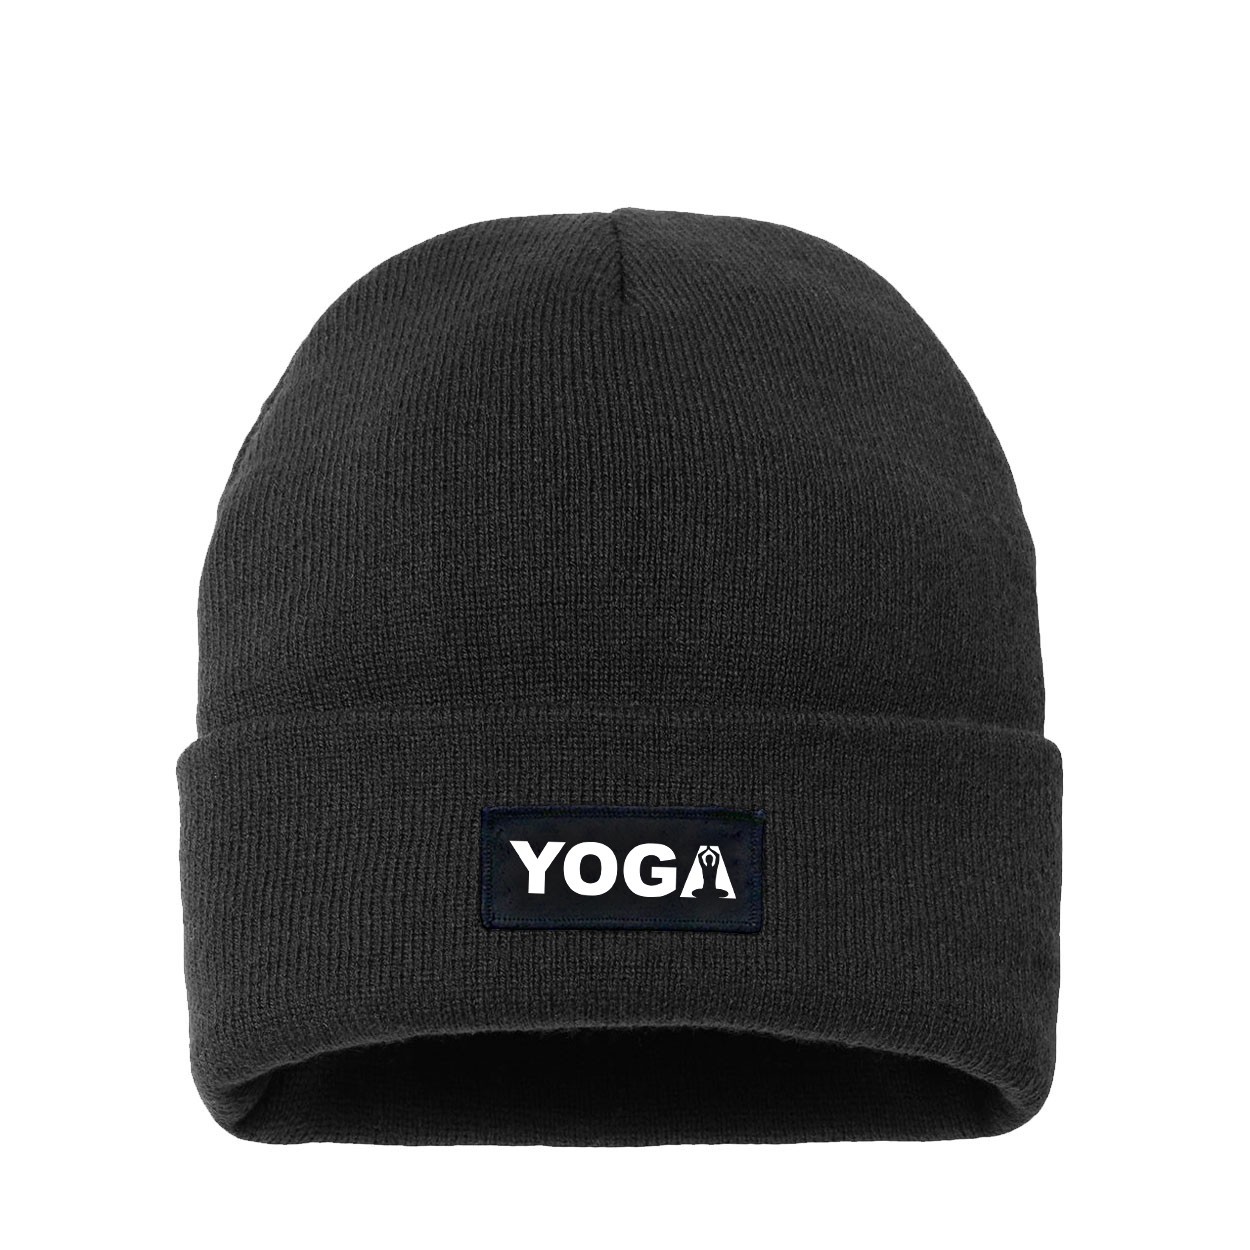 Yoga Meditation Logo Night Out Woven Patch Night Out Sherpa Lined Cuffed Beanie Black (White Logo)